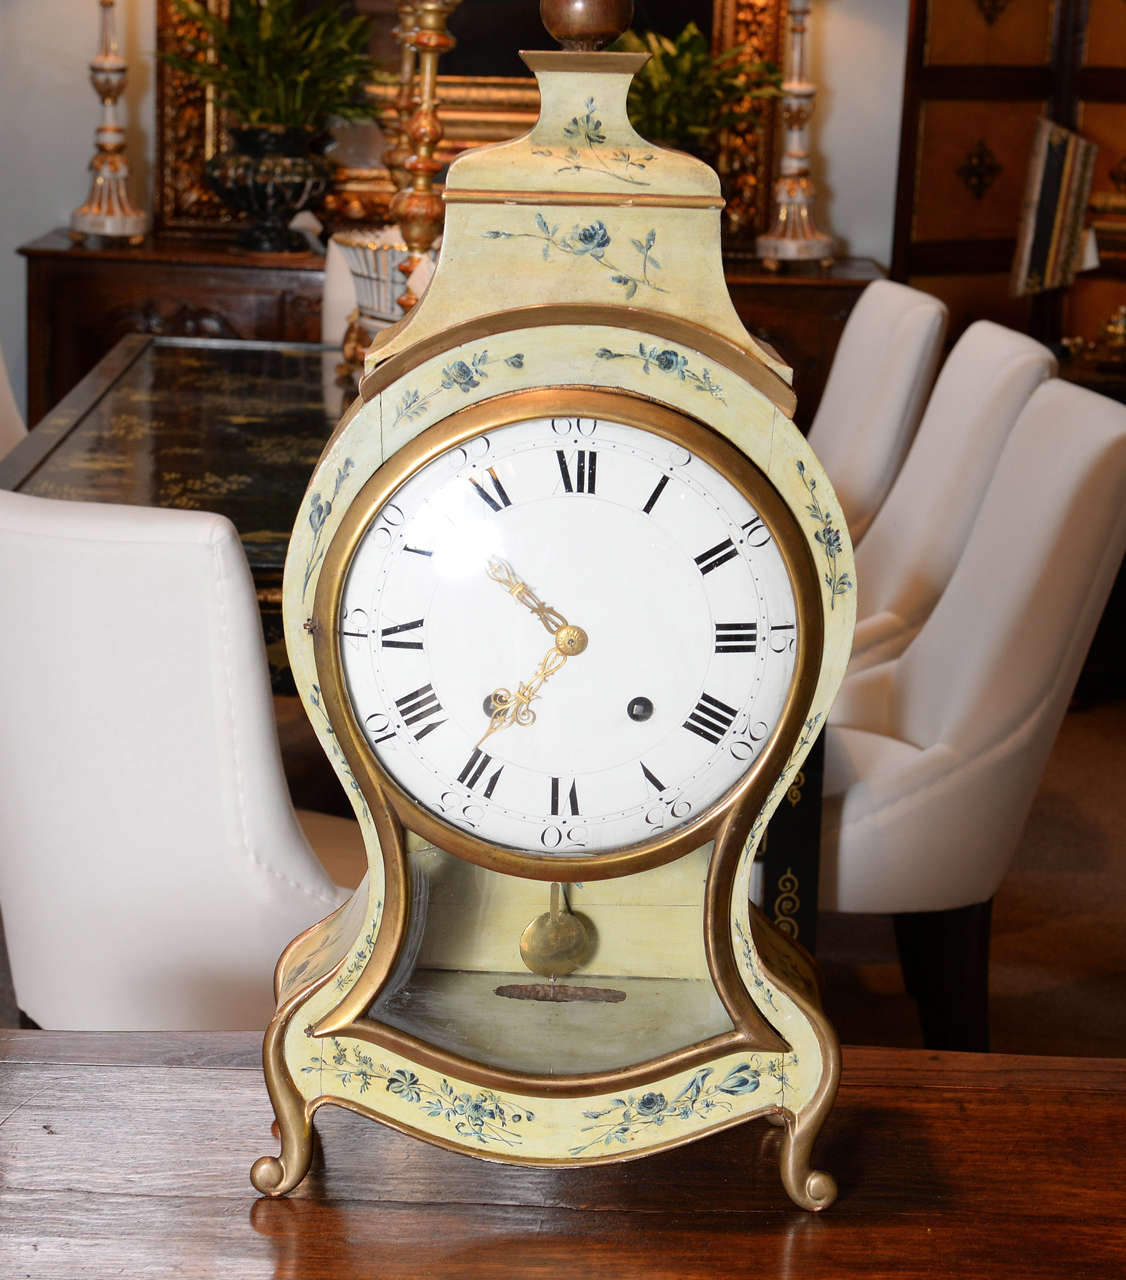 18th century Swiss cartel clock, circa 1790
Painted in the style of toile fabric this cartel clock has been designed in the classic style. The painted decoration on the clock is somewhat naive with small roses adorning the case. The stand, which